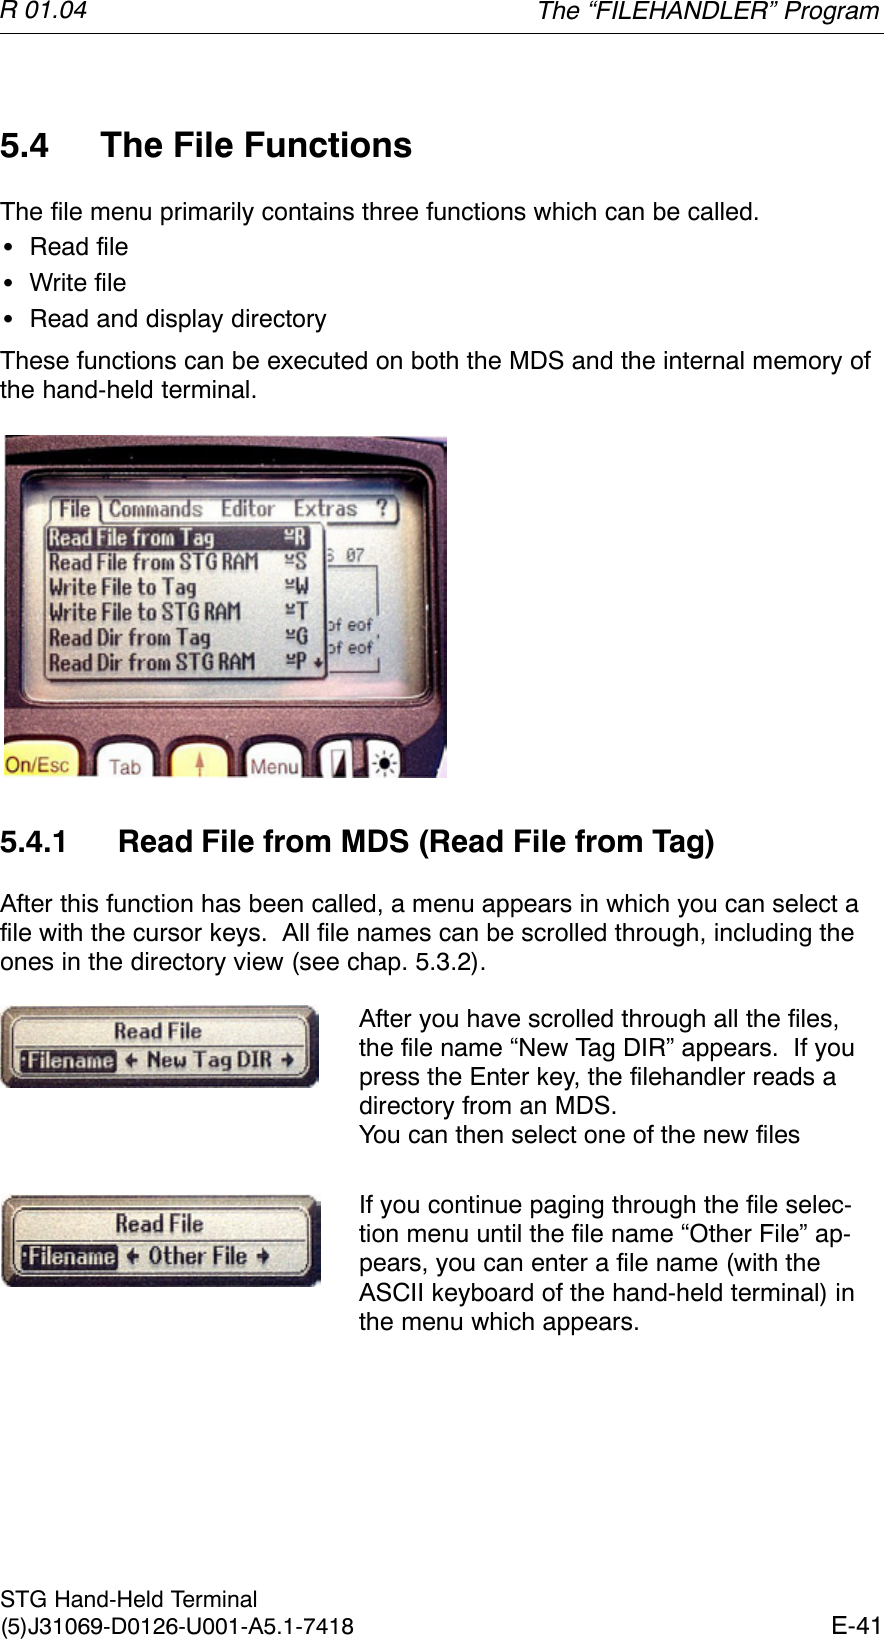 R 01.04E-41STG Hand-Held Terminal(5)J31069-D0126-U001-A5.1-74185.4 The File FunctionsThe file menu primarily contains three functions which can be called.SRead fileSWrite fileSRead and display directoryThese functions can be executed on both the MDS and the internal memory ofthe hand-held terminal.5.4.1 Read File from MDS (Read File from Tag)After this function has been called, a menu appears in which you can select afile with the cursor keys.  All file names can be scrolled through, including theones in the directory view (see chap. 5.3.2).After you have scrolled through all the files,the file name “New Tag DIR” appears.  If youpress the Enter key, the filehandler reads adirectory from an MDS.You can then select one of the new filesIf you continue paging through the file selec-tion menu until the file name “Other File” ap-pears, you can enter a file name (with theASCII keyboard of the hand-held terminal) inthe menu which appears.The “FILEHANDLER” Program